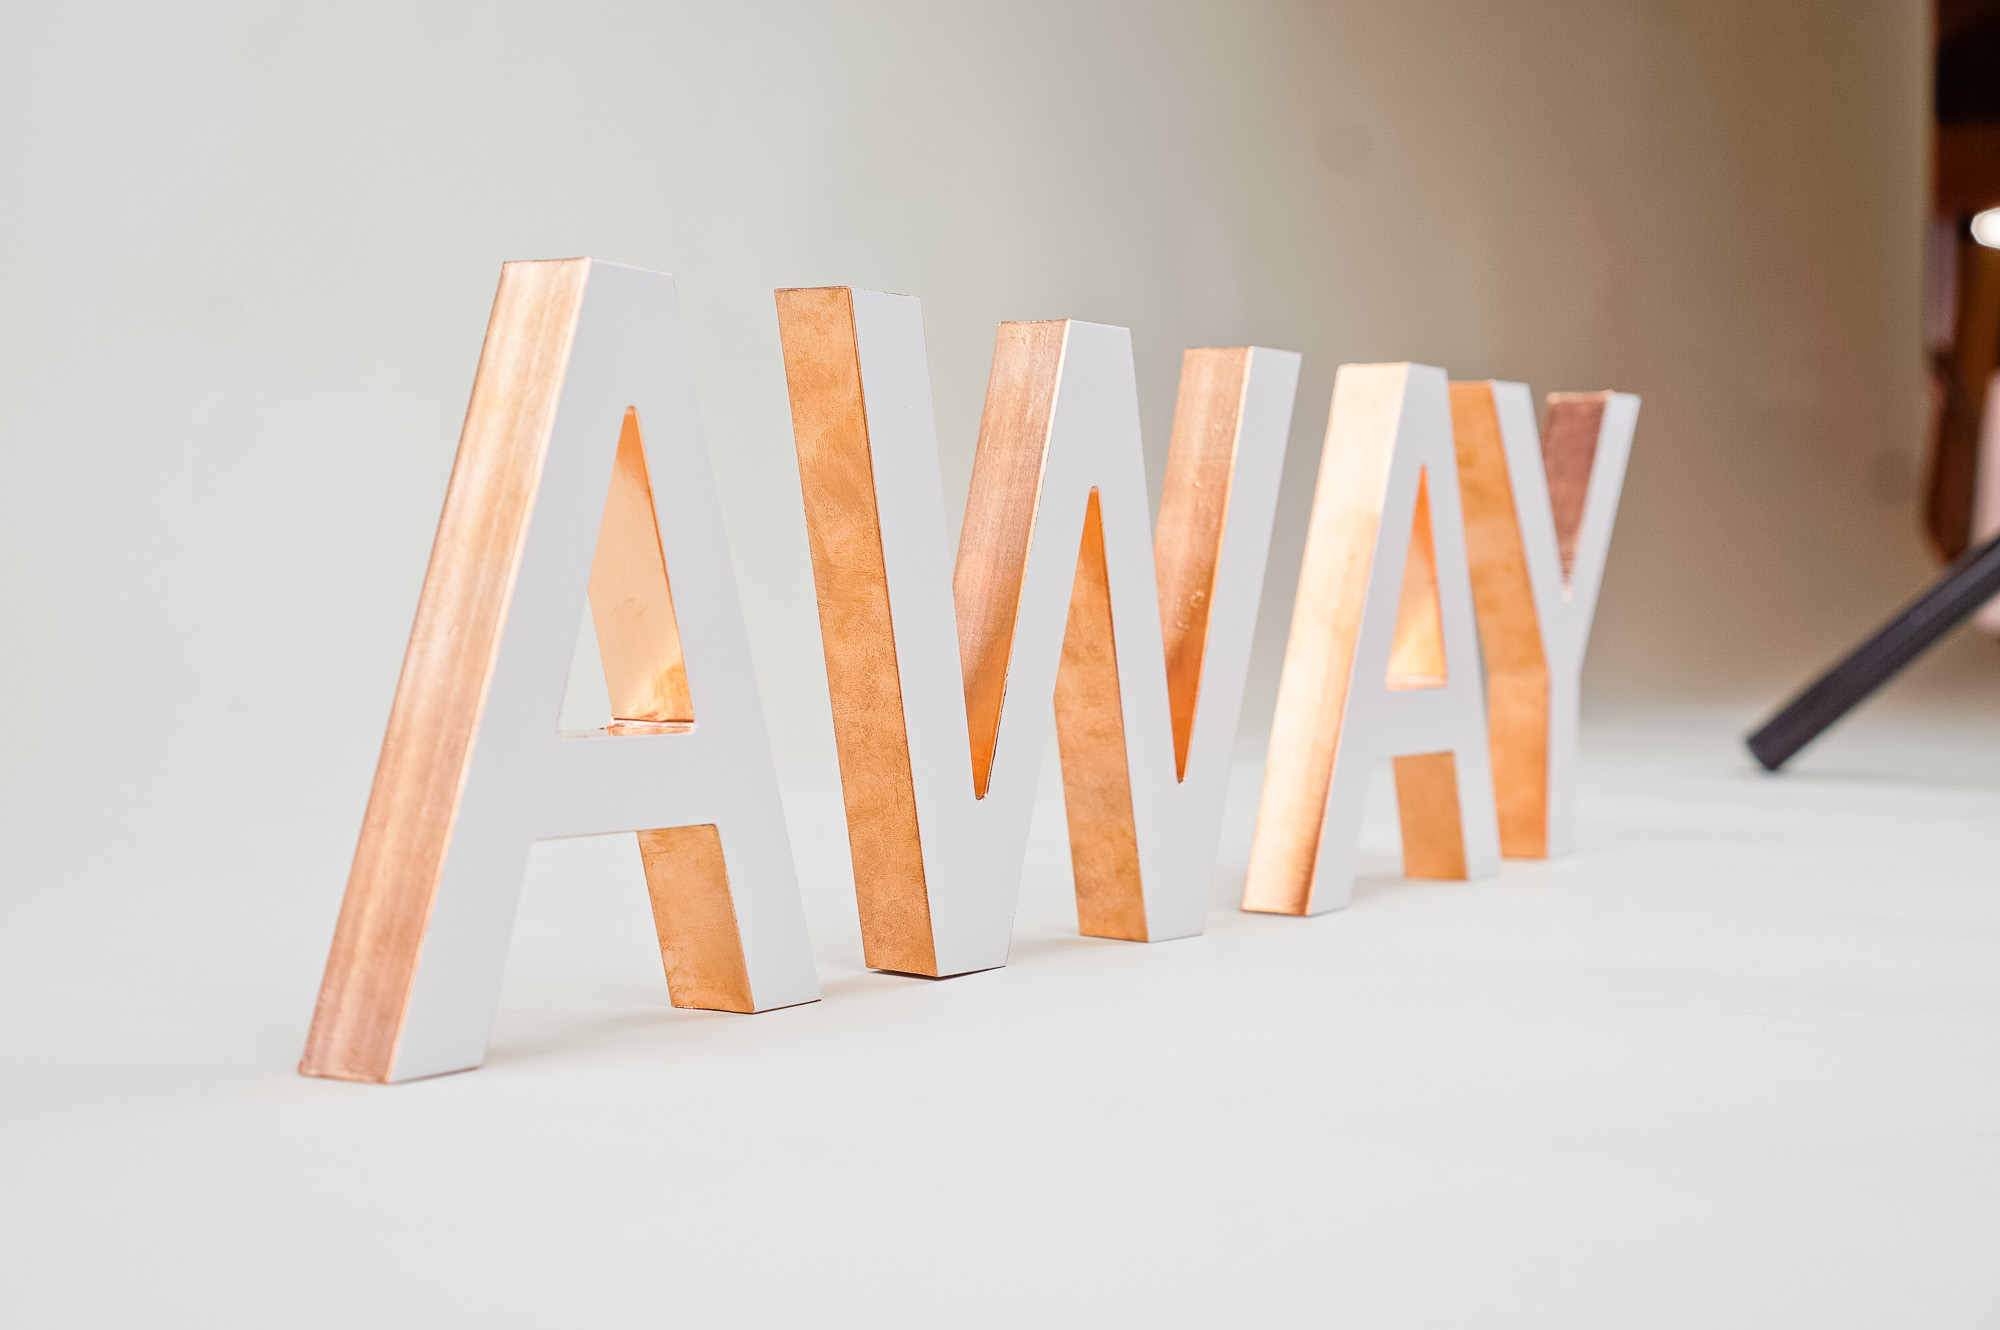 White letters with copper edges for Areteway, a clothing and gift boutique in Santa Rosa, CA.